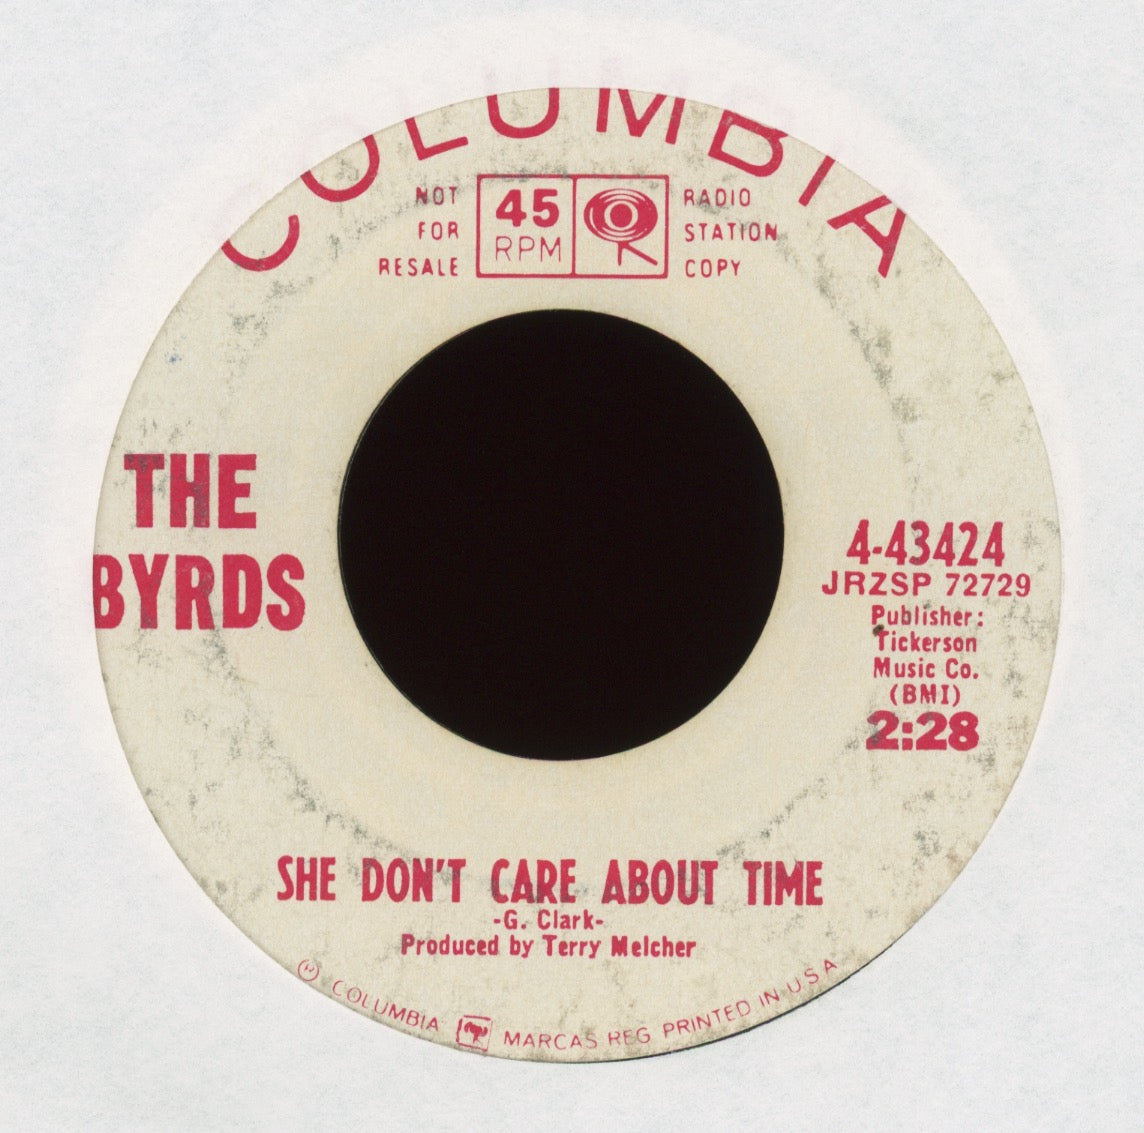 The Byrds - Turn! Turn! Turn! (To Everything There Is A Season) on Columbia Promo Rock 45